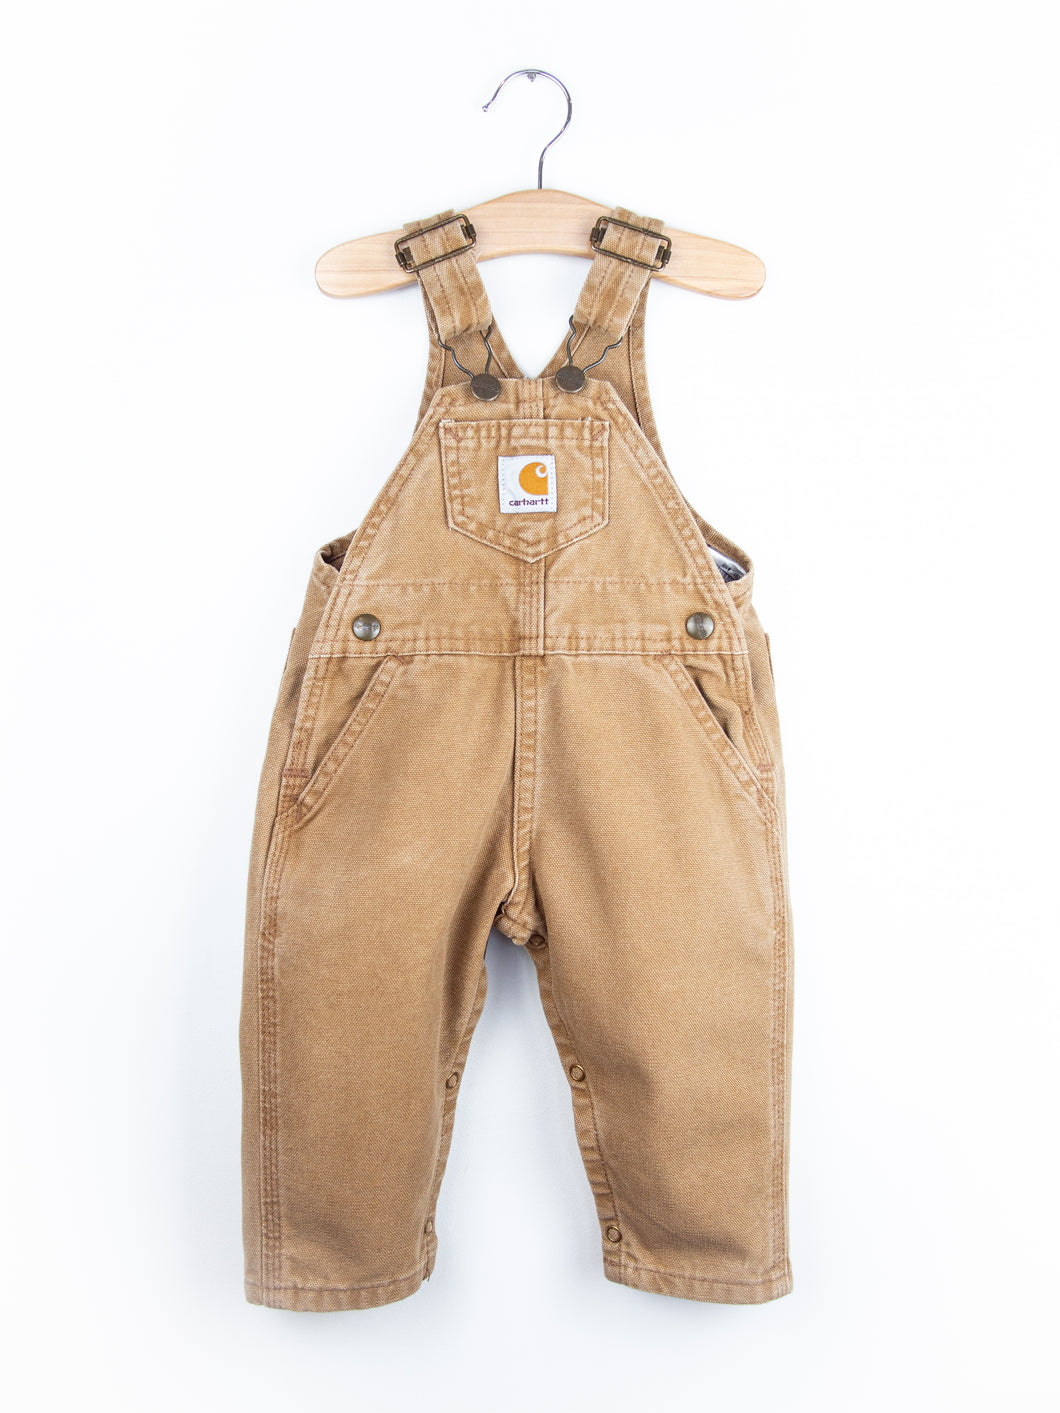 Carhartt Vintage Sand Canvas Dungarees - Age 9 months